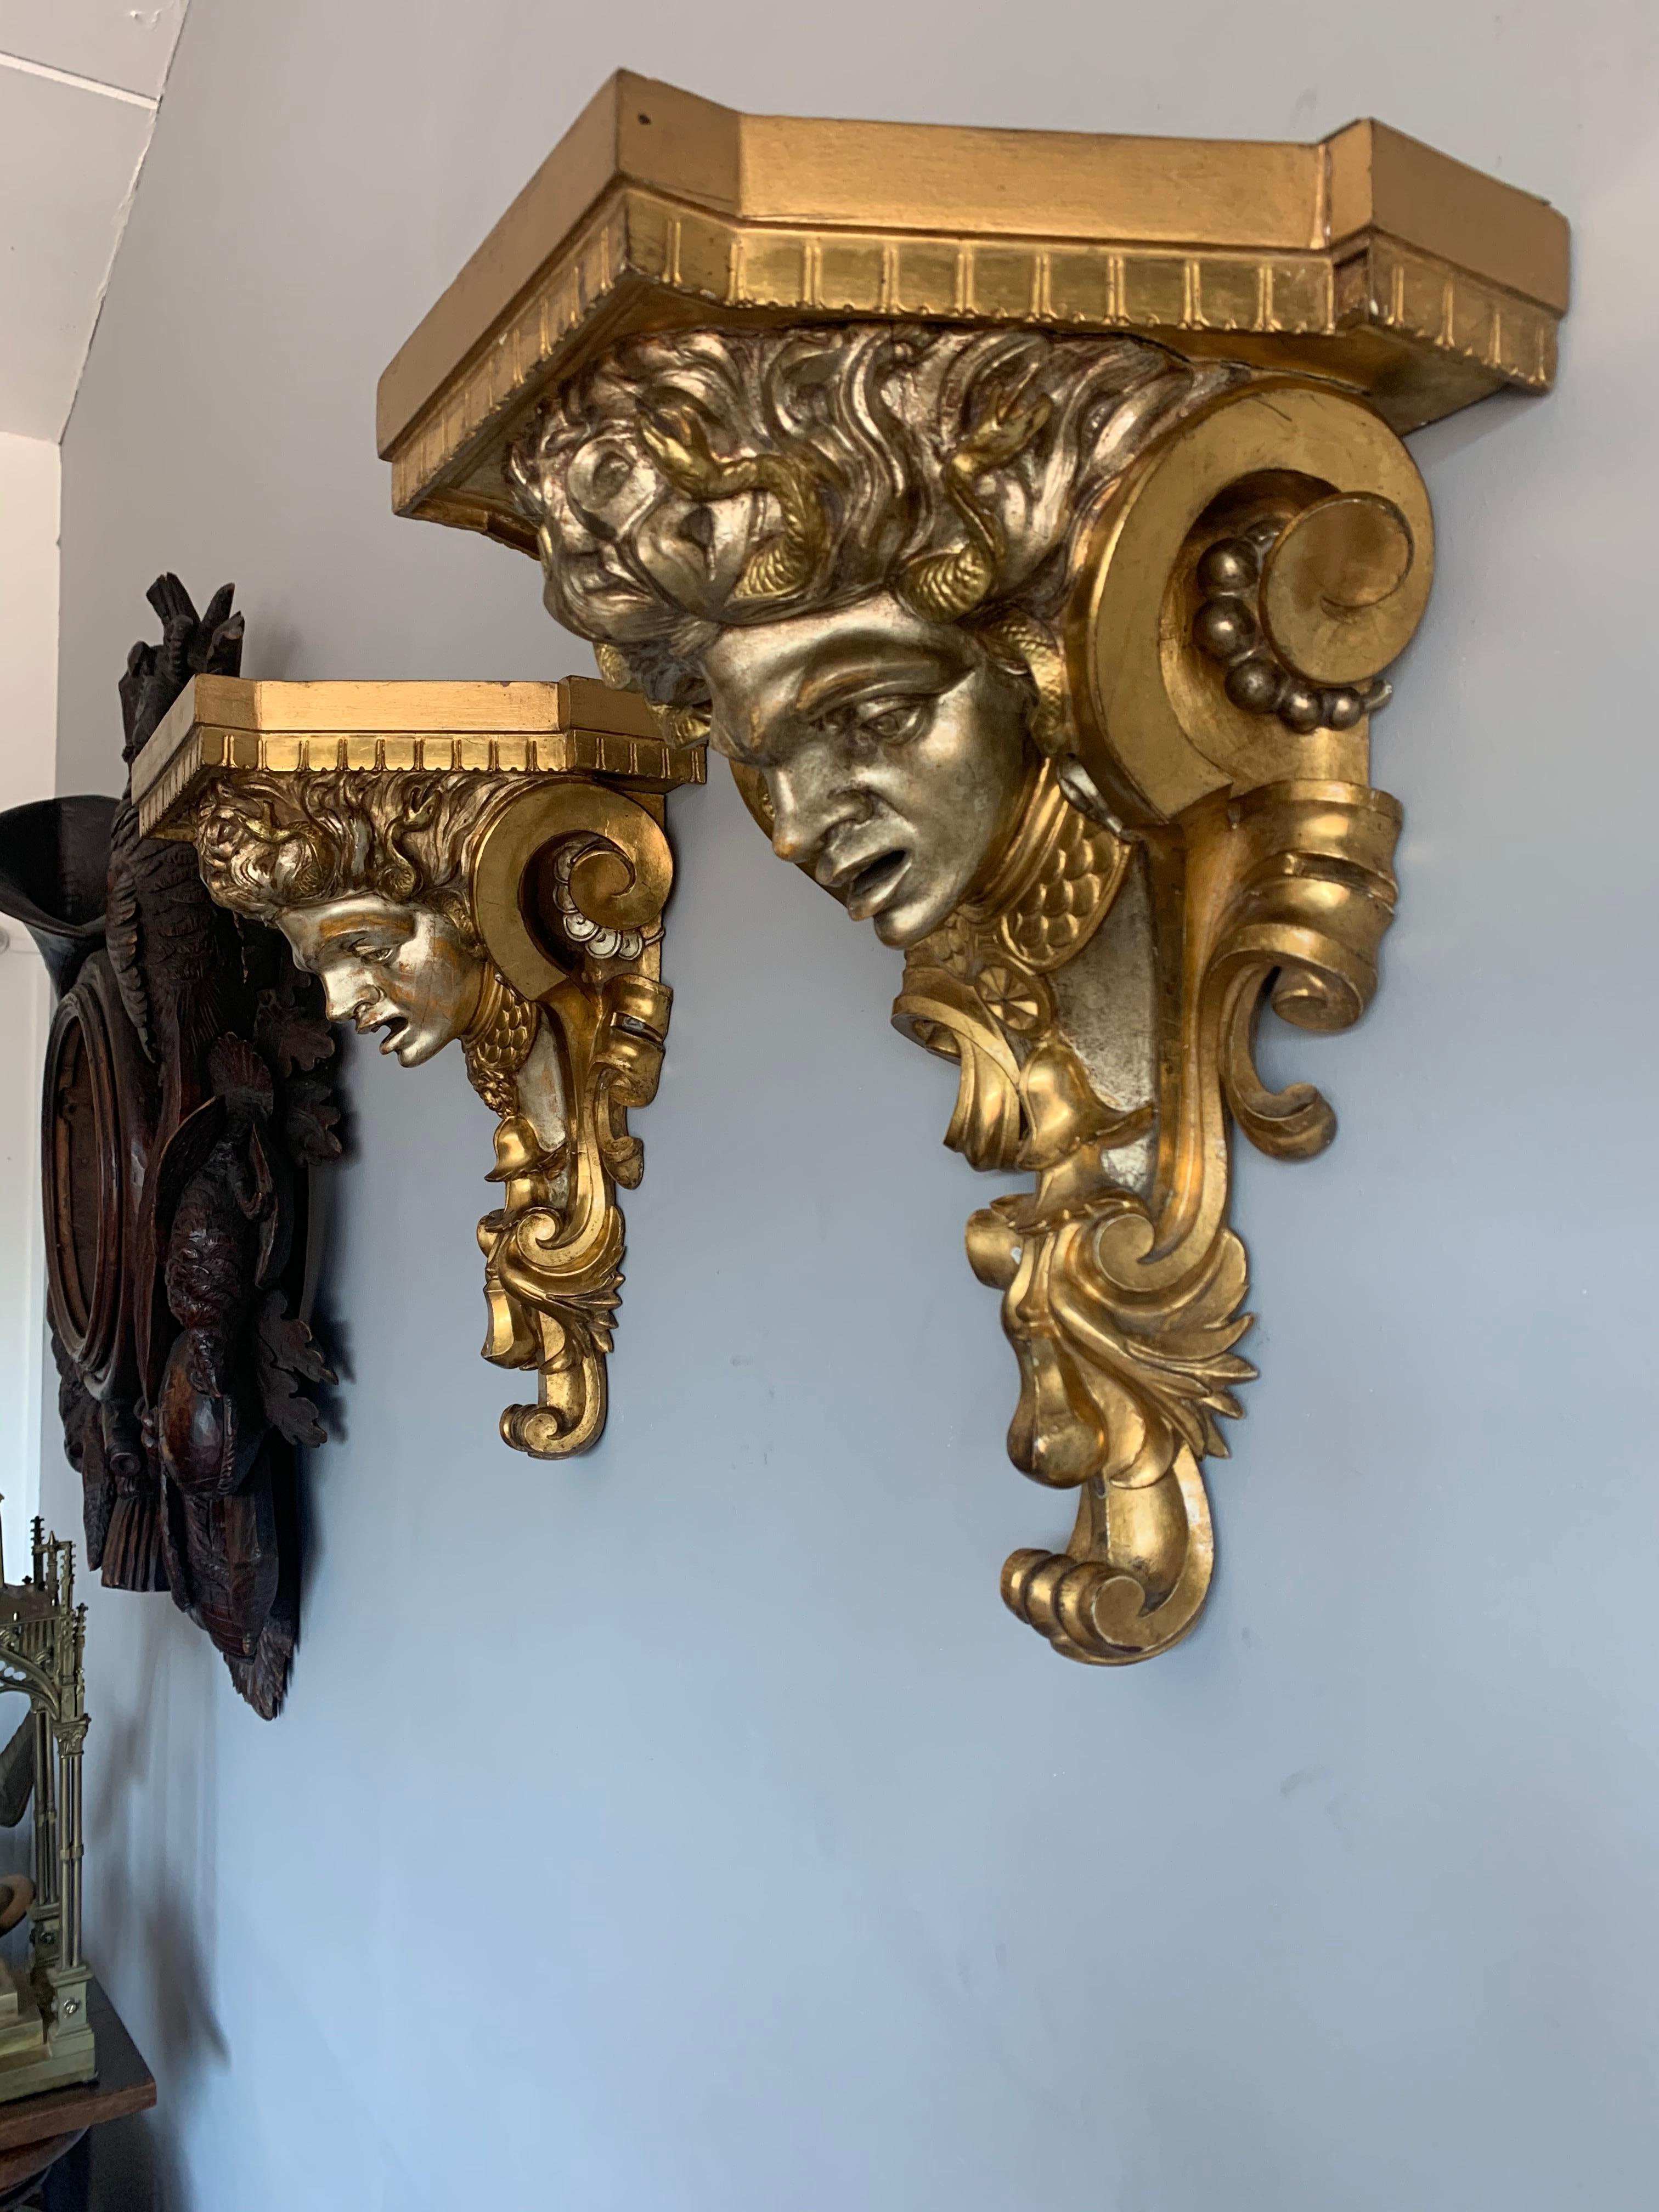 Matching pair of 19th century, Italian grotesque wall brackets or shelves.

This unique and amazingly hand carved pair of antique wall brackets is another one of our recent great finds.
The story of Medusa in Greek Mythology has been world famous